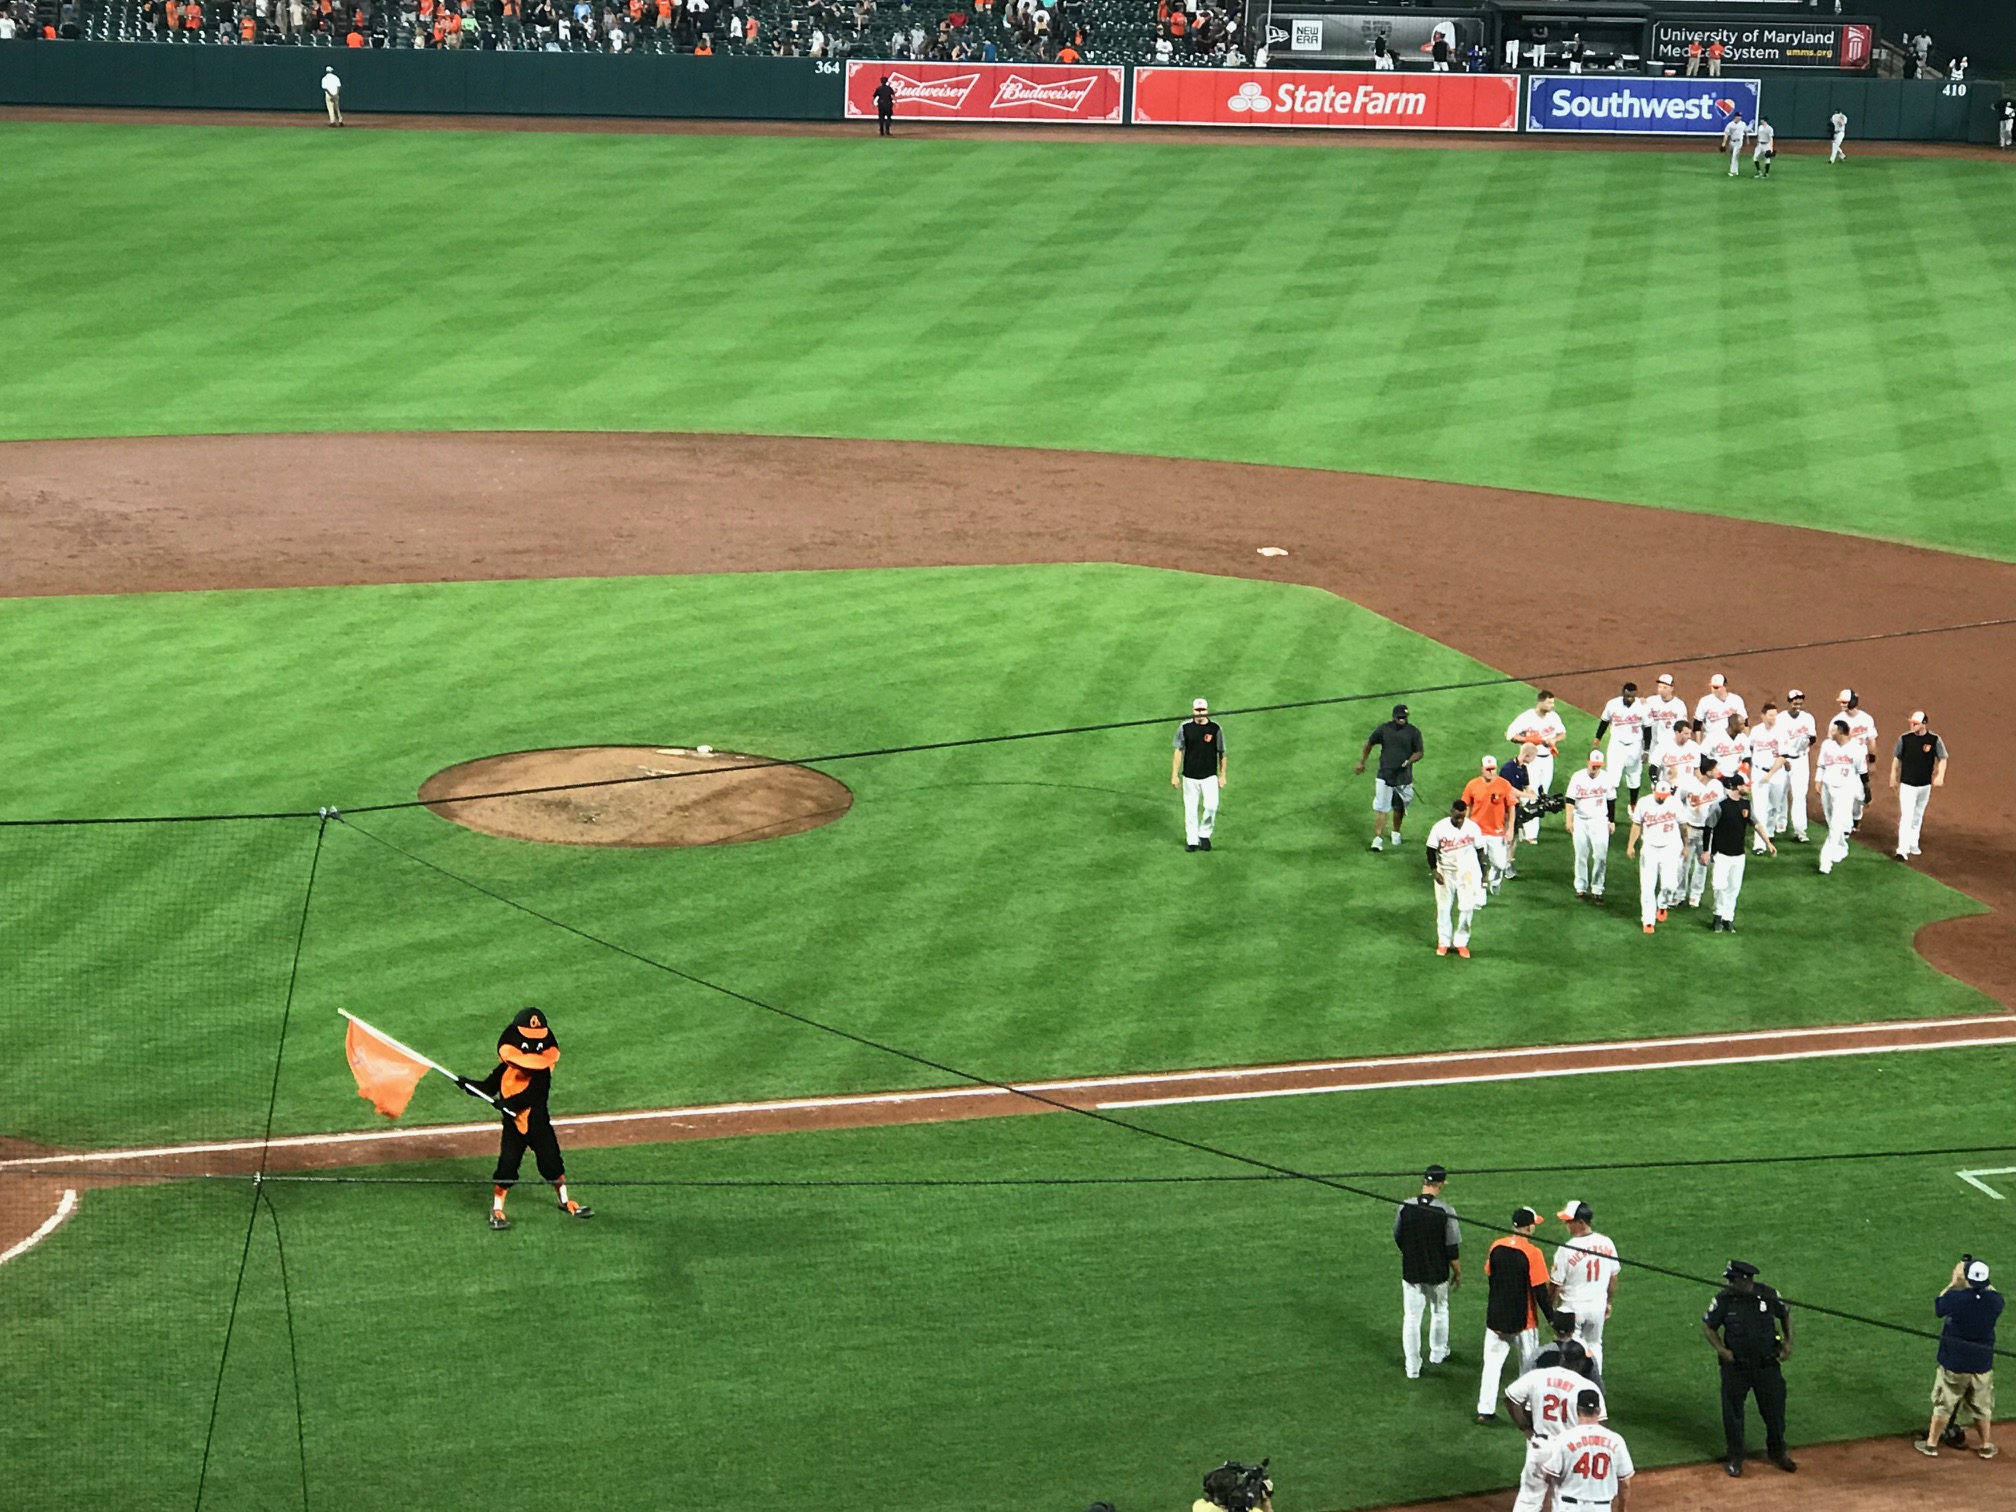 Orioles offer 1992 ticket prices to honor Camden Yards' 30th anniversary -  WTOP News